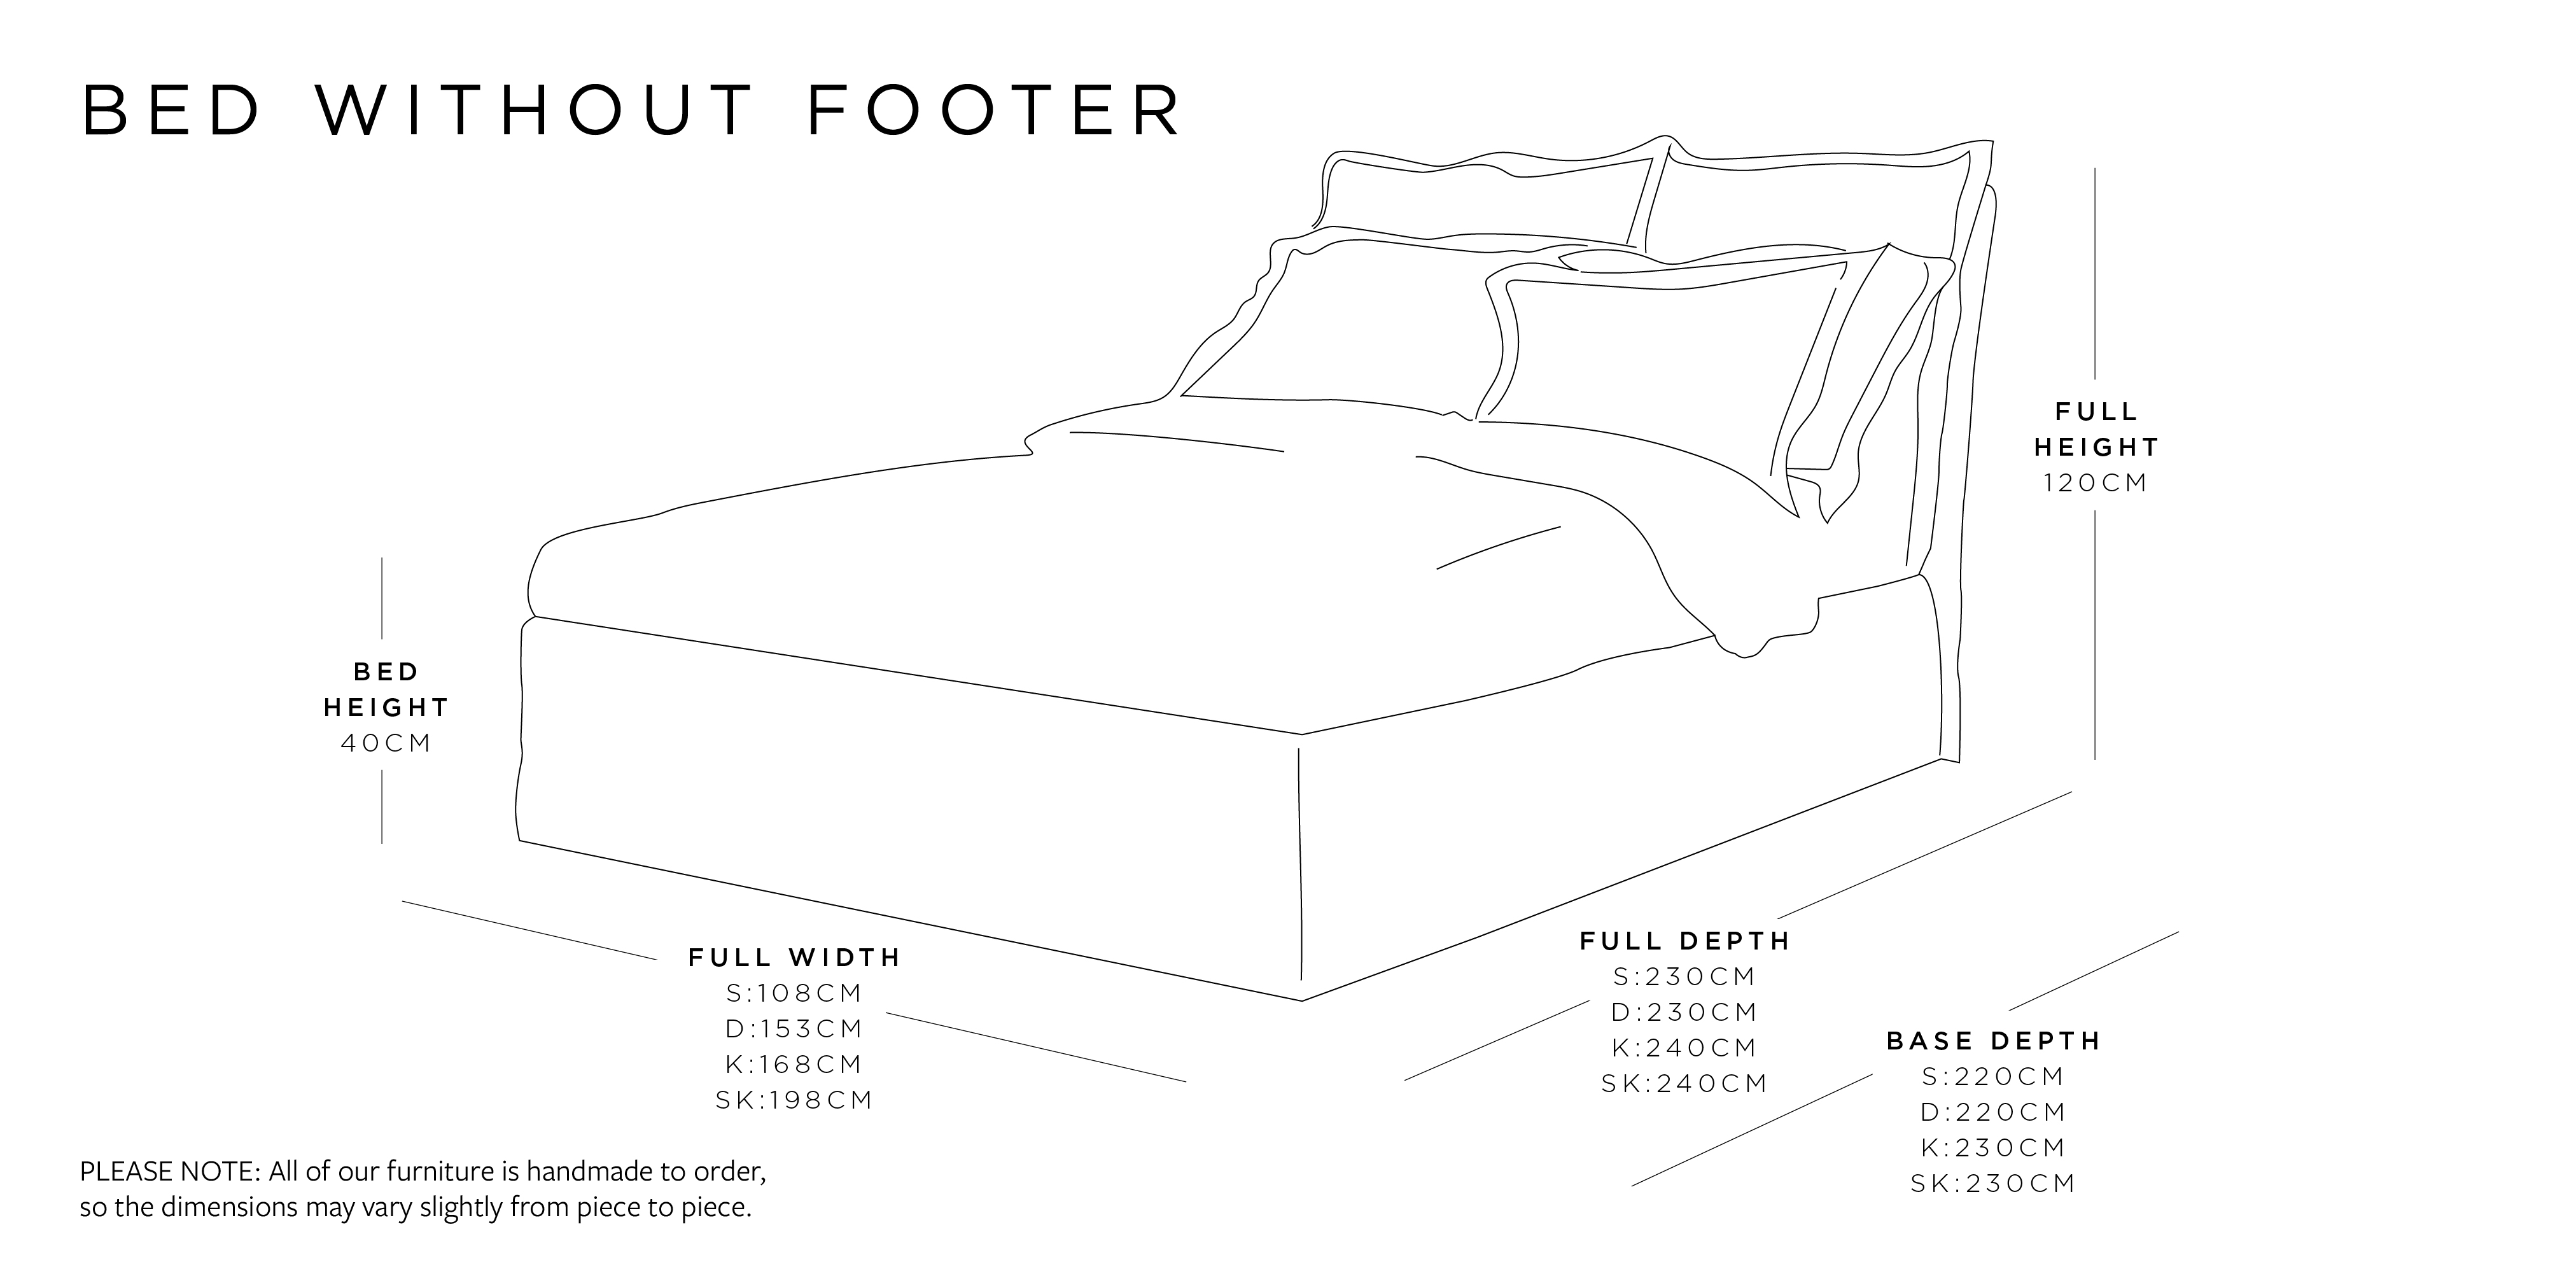 King Bed | Marnie Range Size Guide